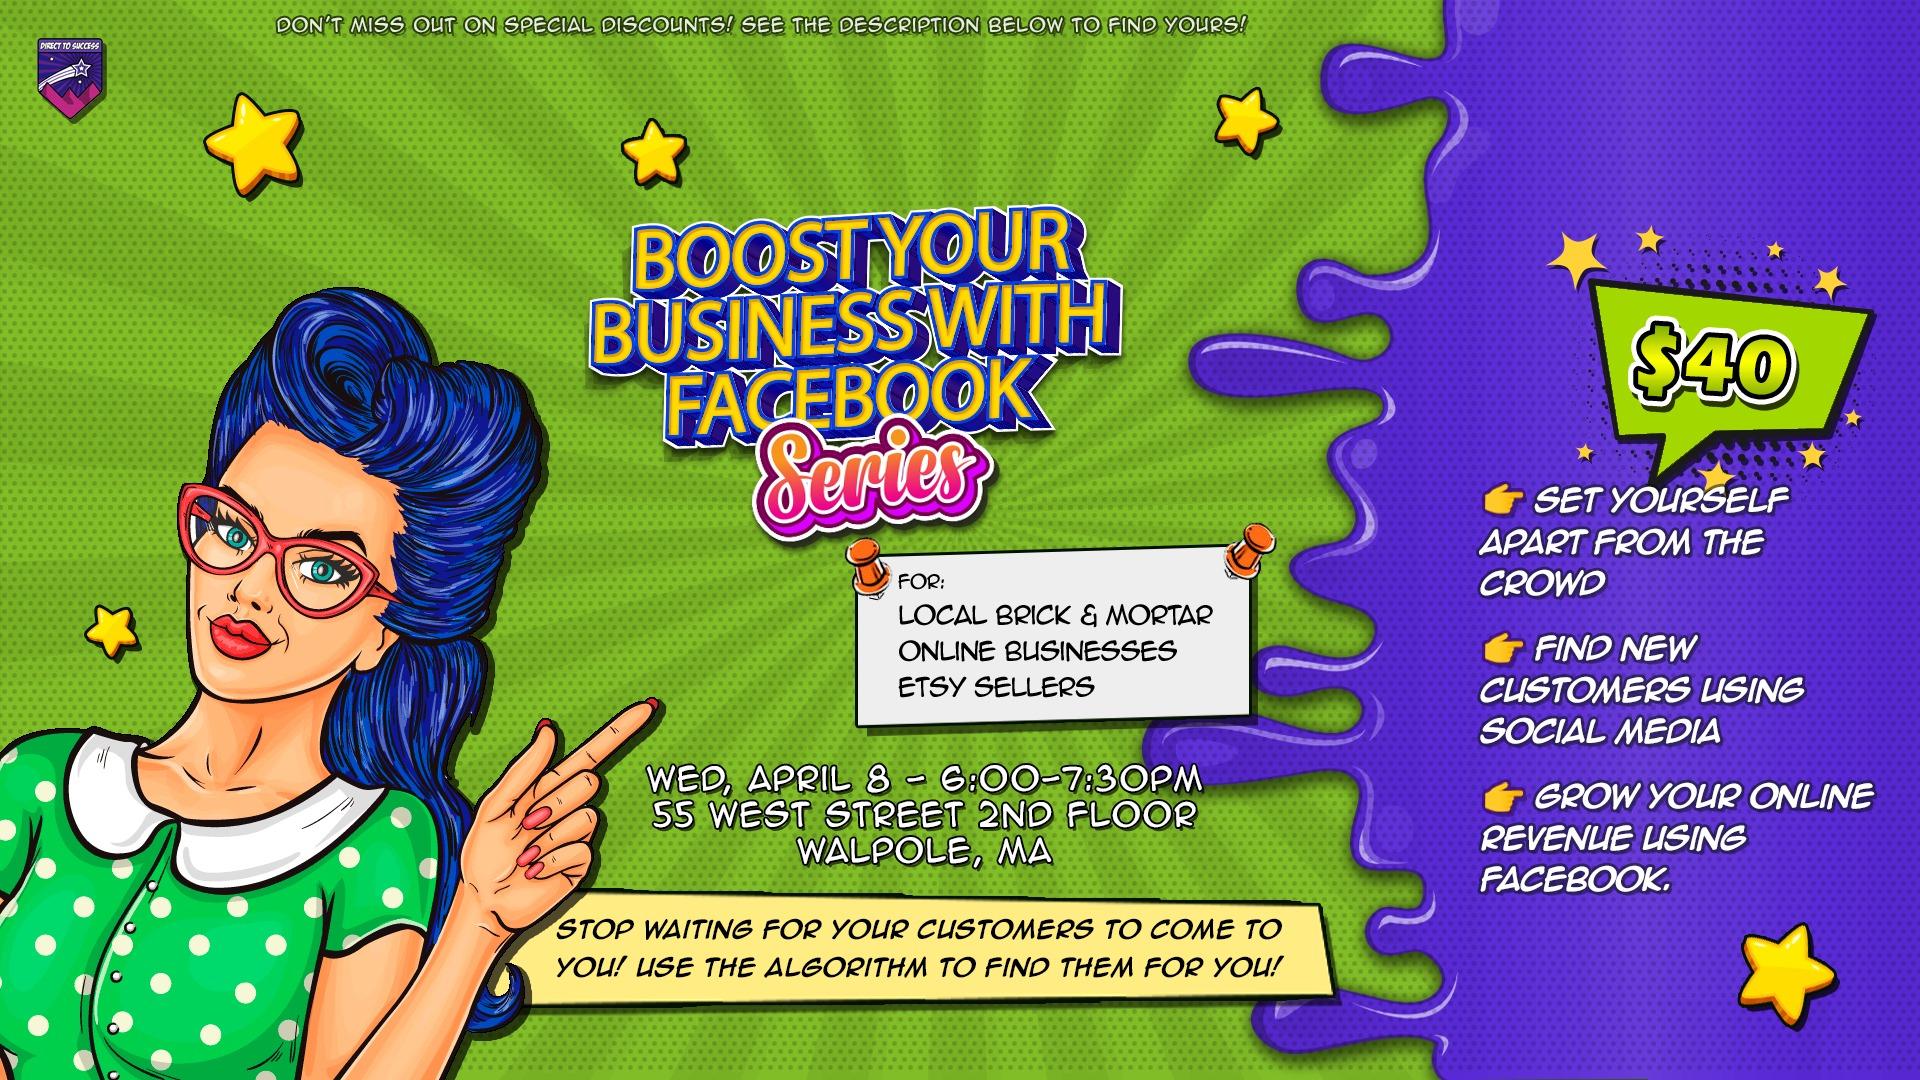 Boost Your Business with Facebook, Walpole MA